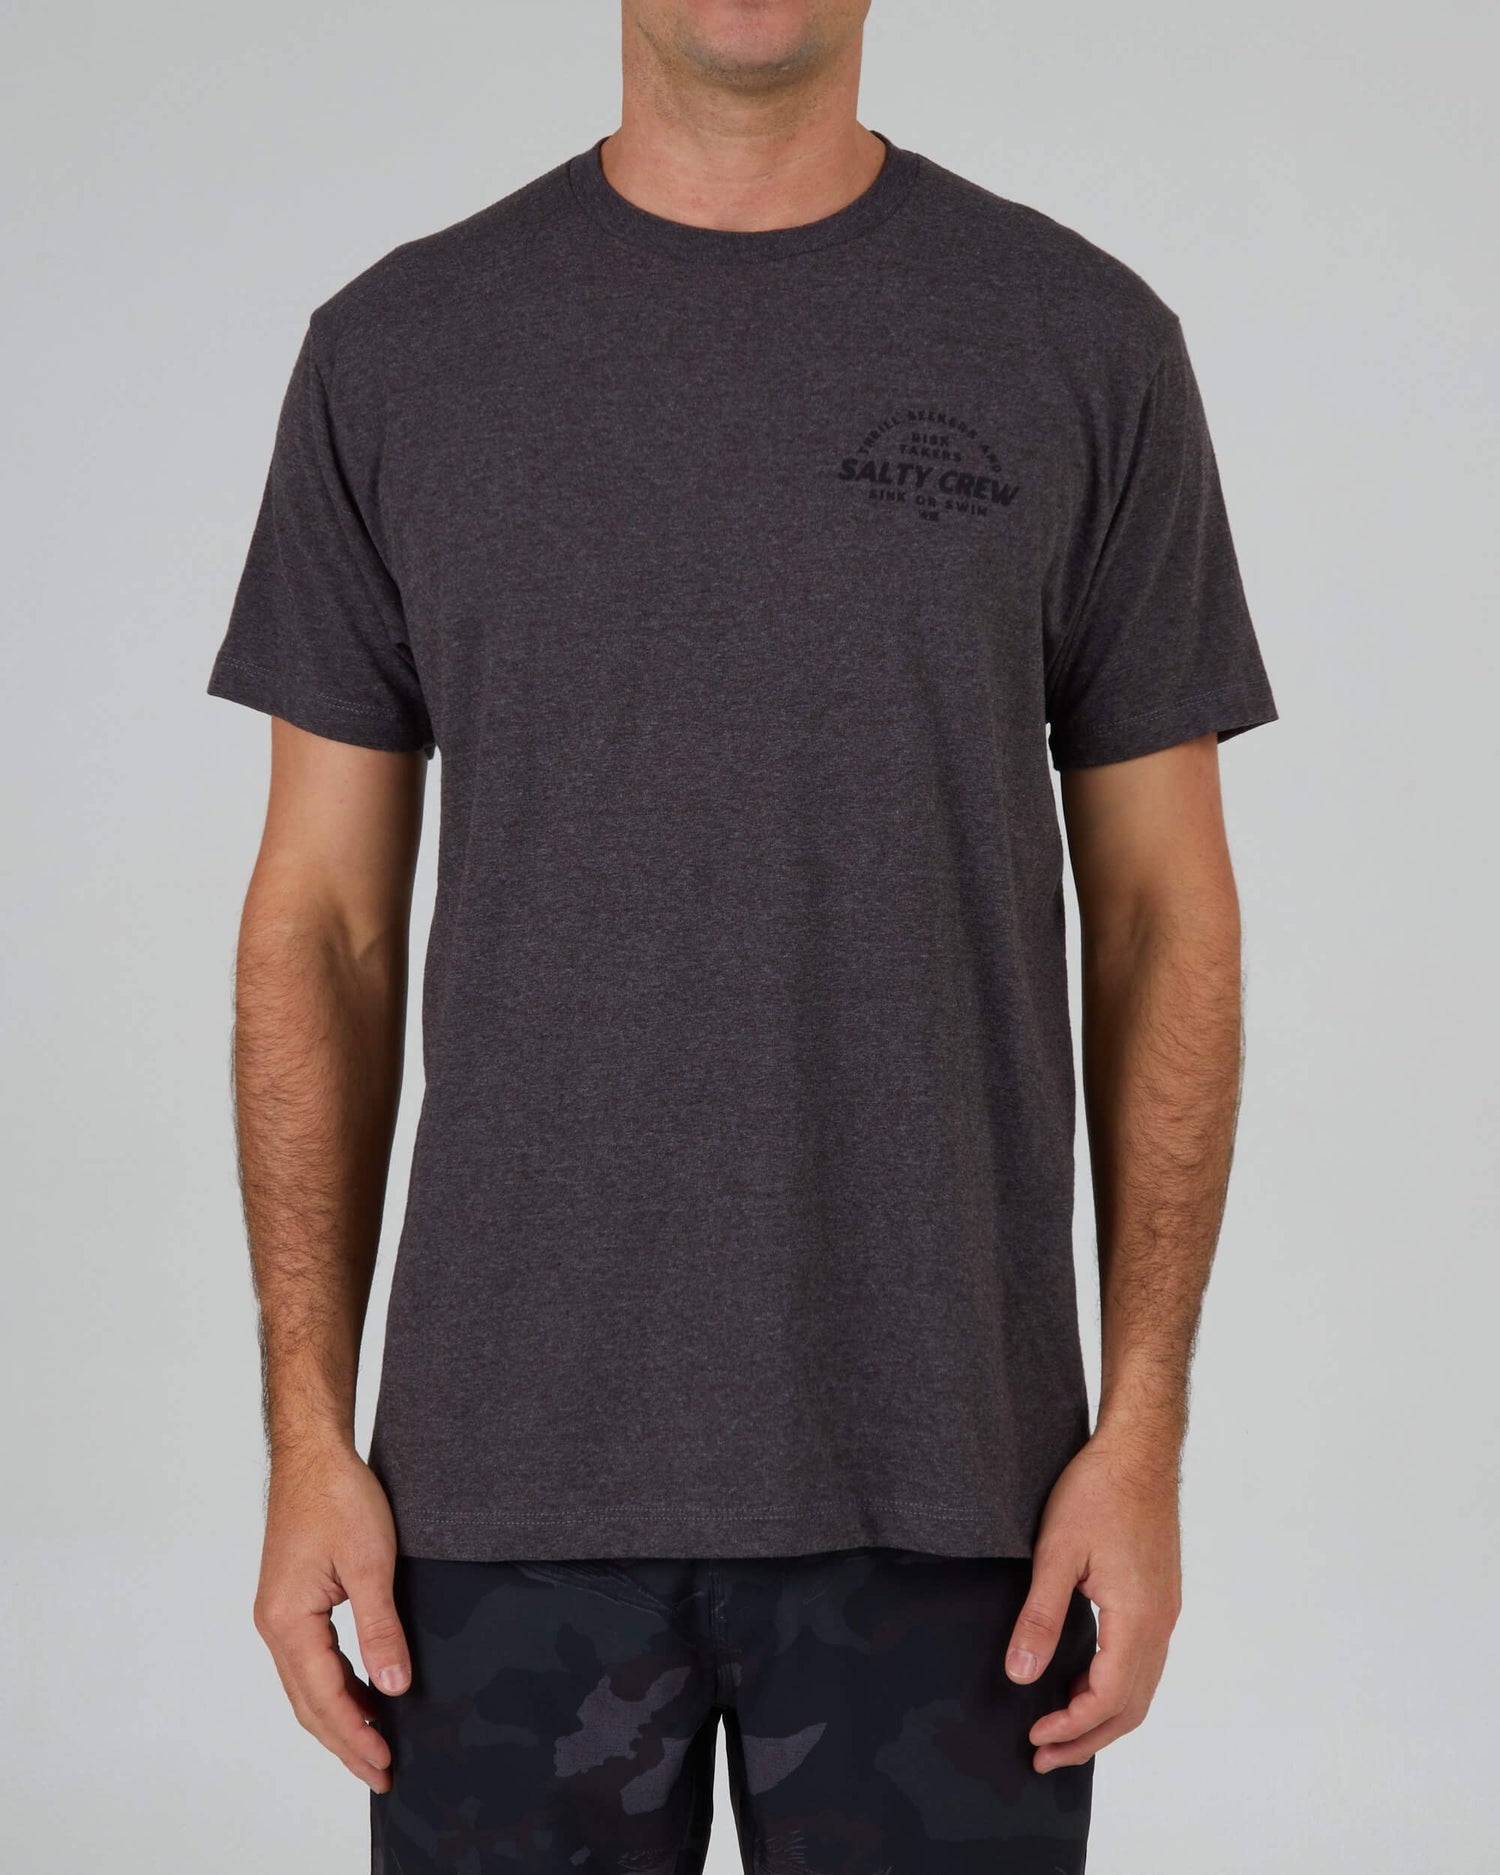 Salty crew T-SHIRTS S/S Stoked Standard S/S Tee - Charcoal Heather in Charcoal Heather